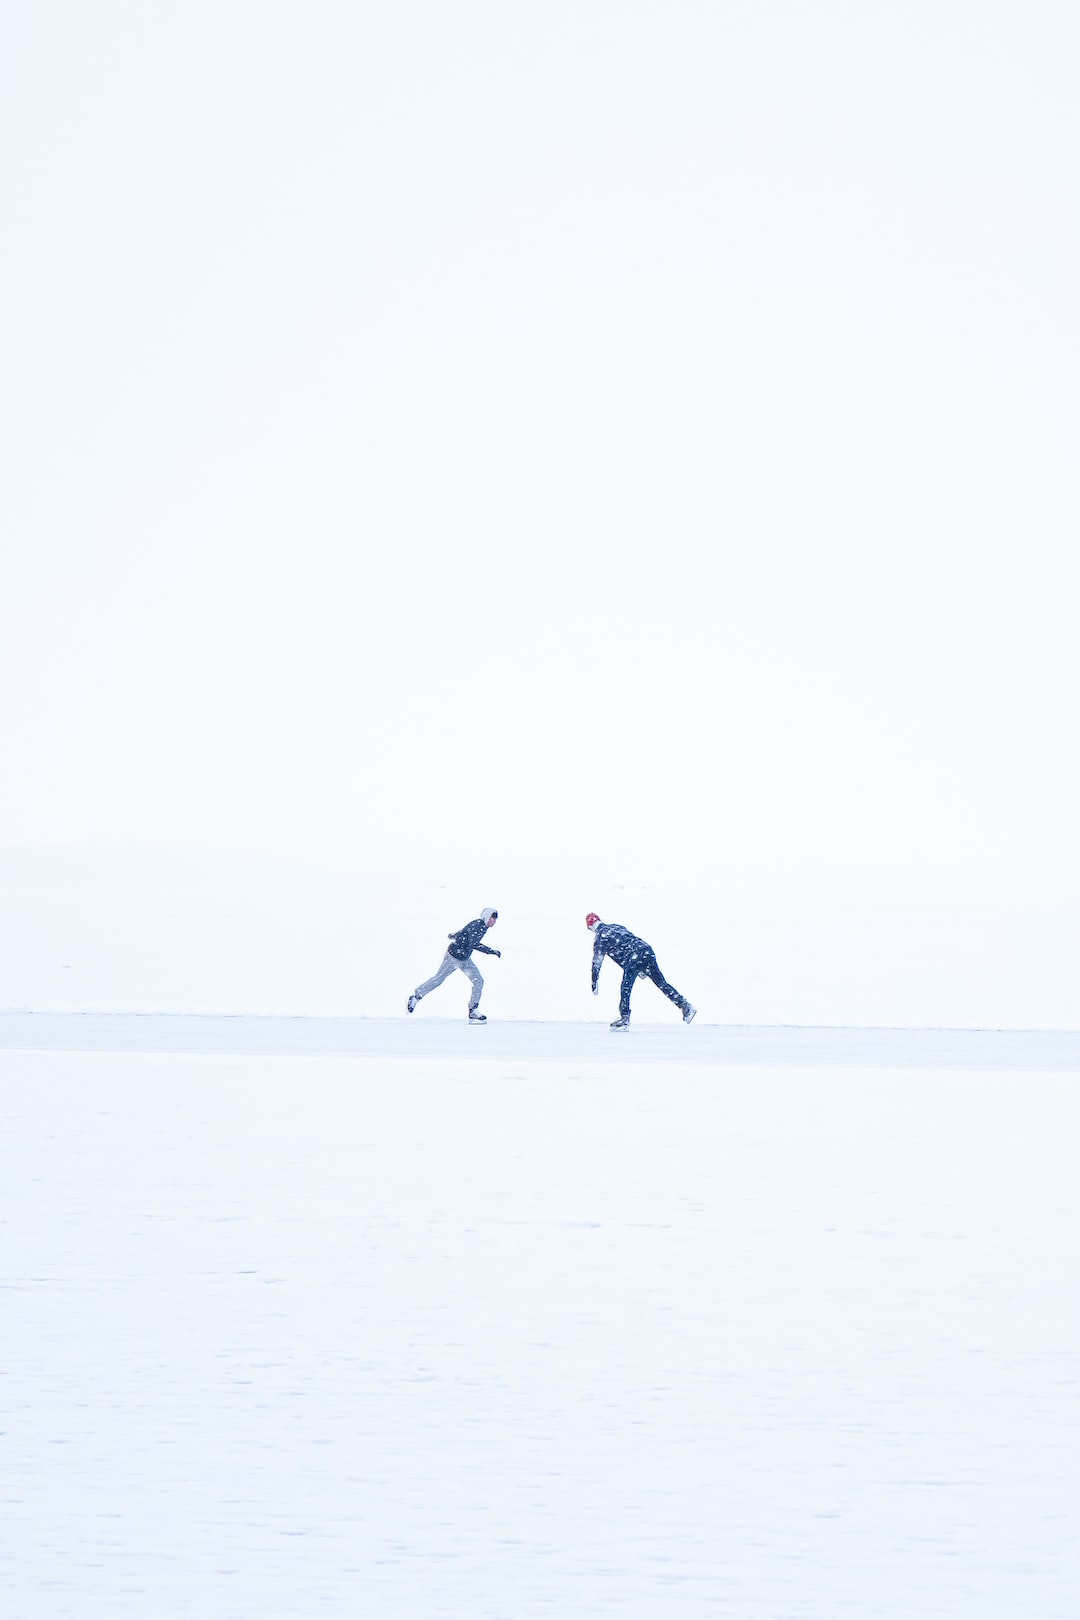 Two men figure skating on a frozen lake. - - - Hey, if you like my photos and want to see more, visit my webpage myrtorp.com - Paypal Support: paypal.me/pmyrtorp - follow me on Instagram: @myrstump - Contact me at Philip@myrtorp.net